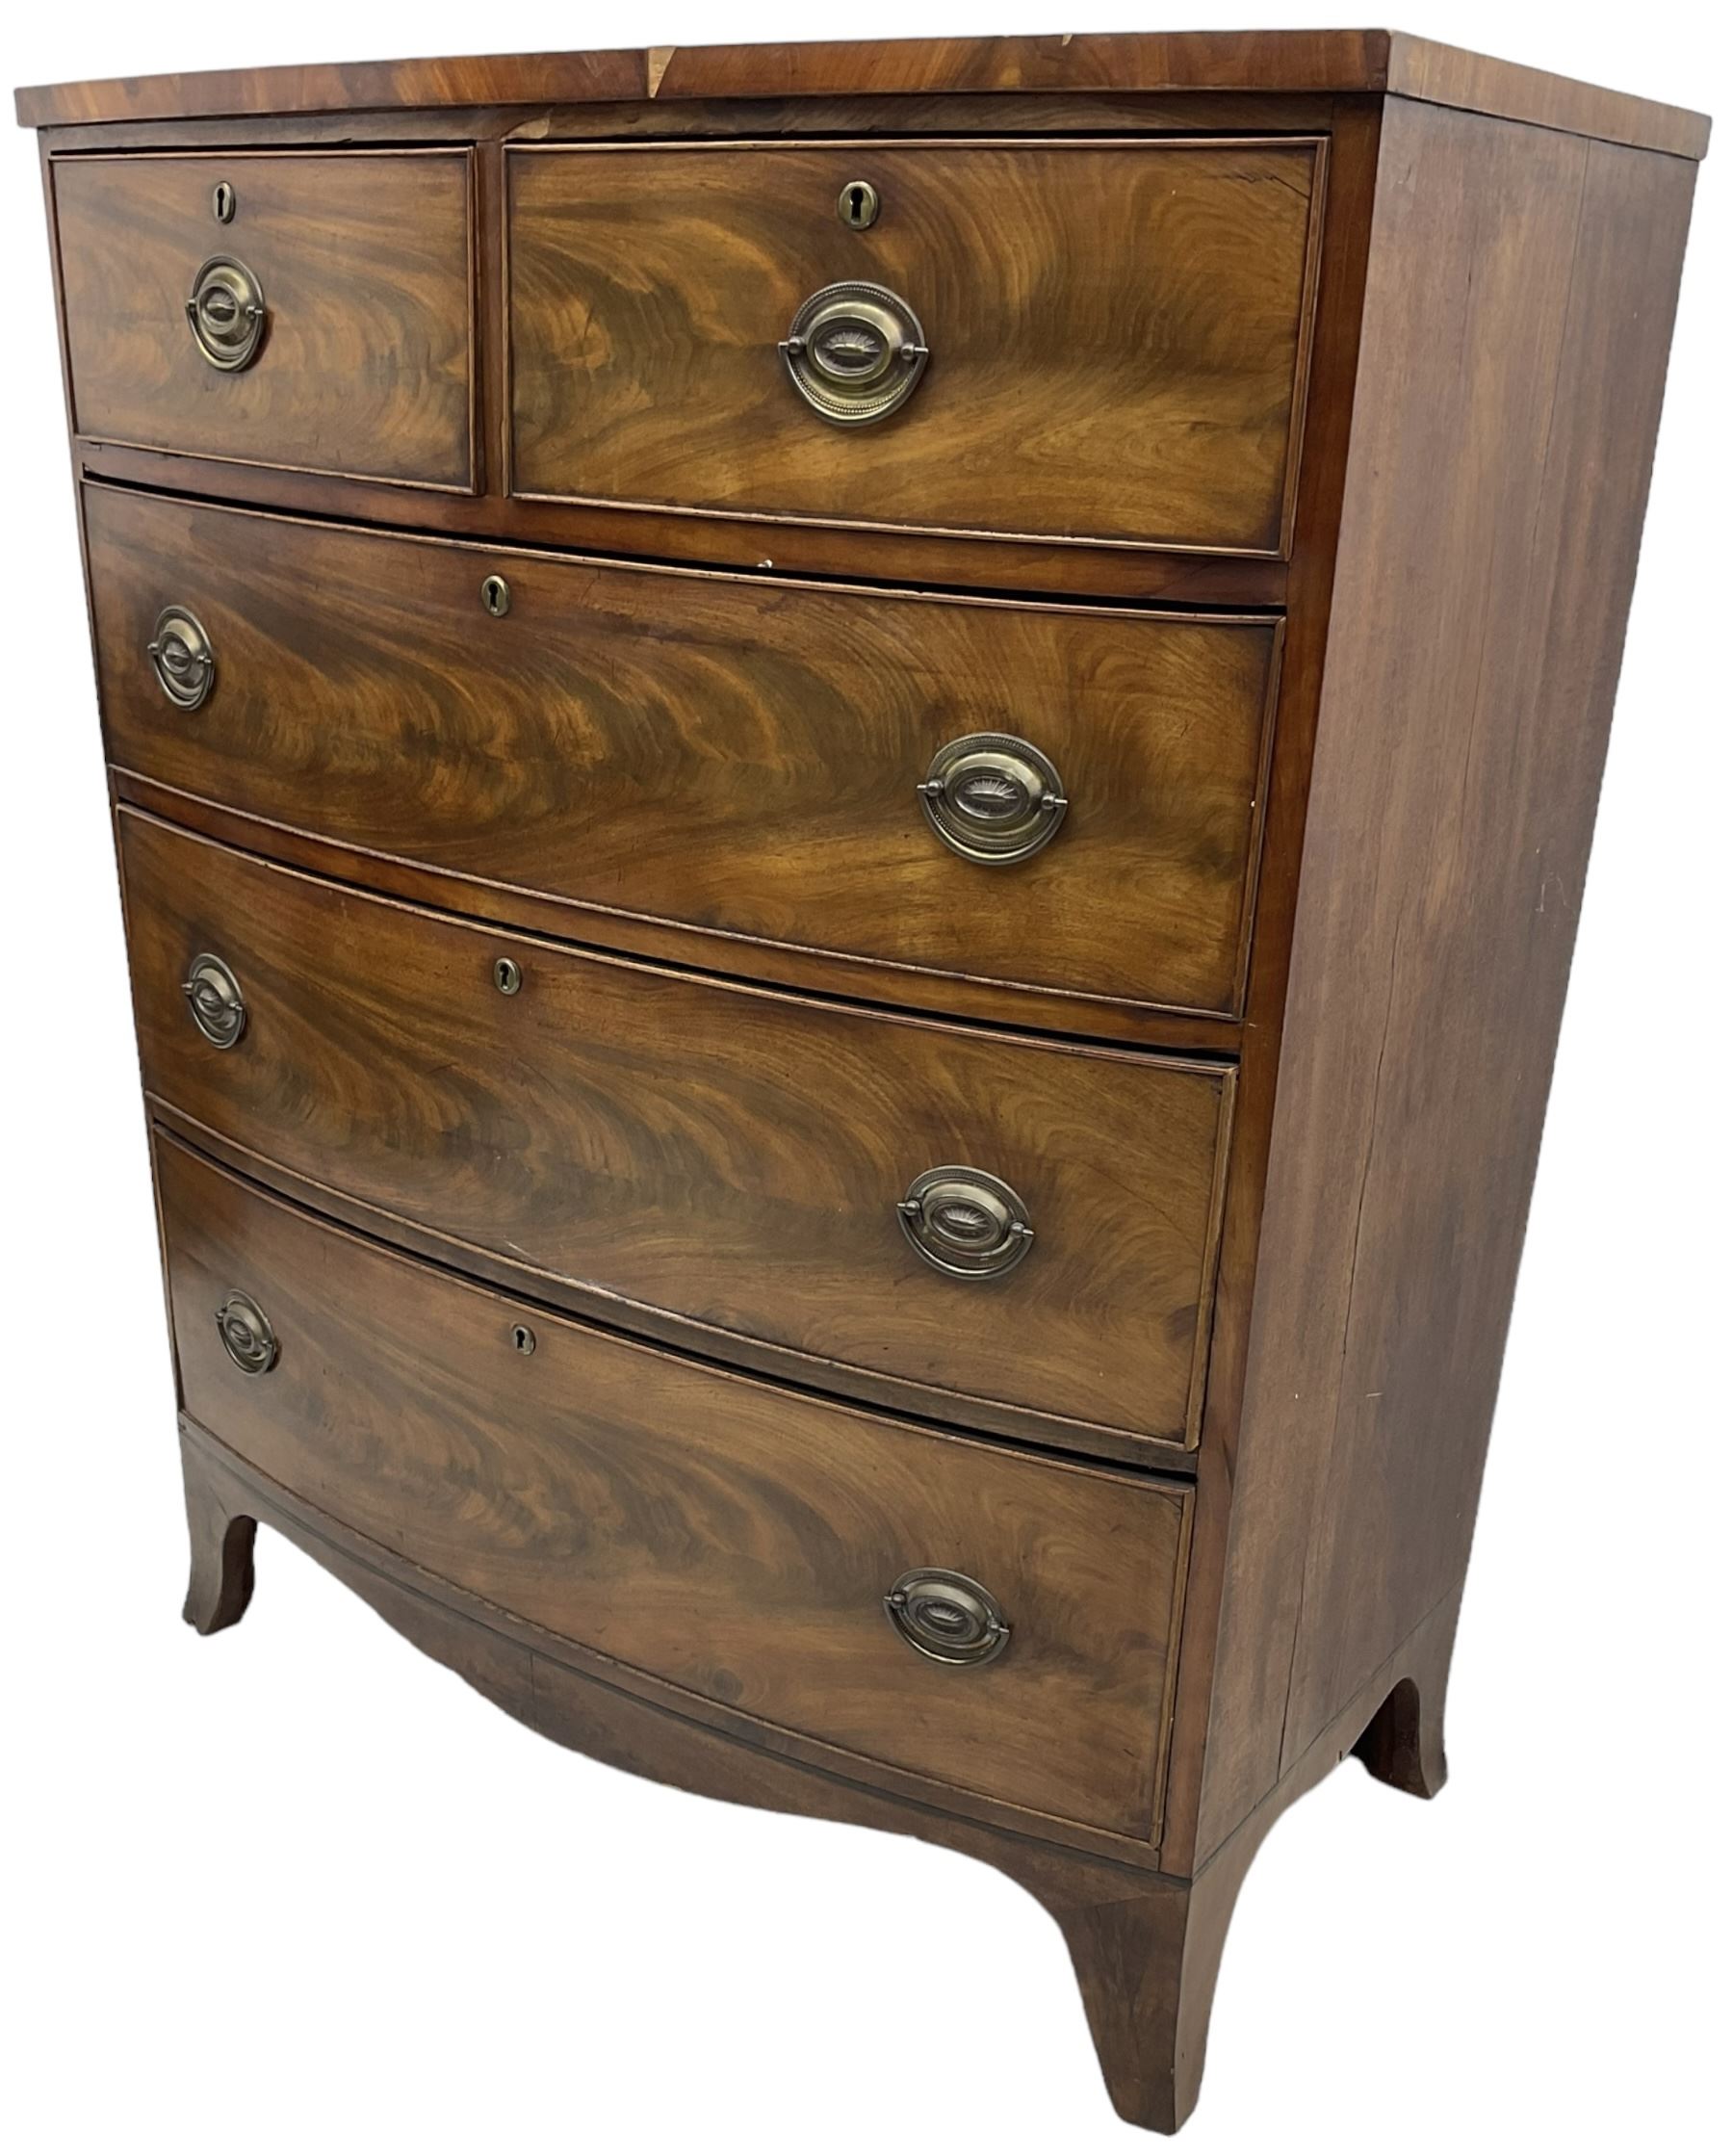 Victorian mahogany bow-front chest - Image 7 of 8